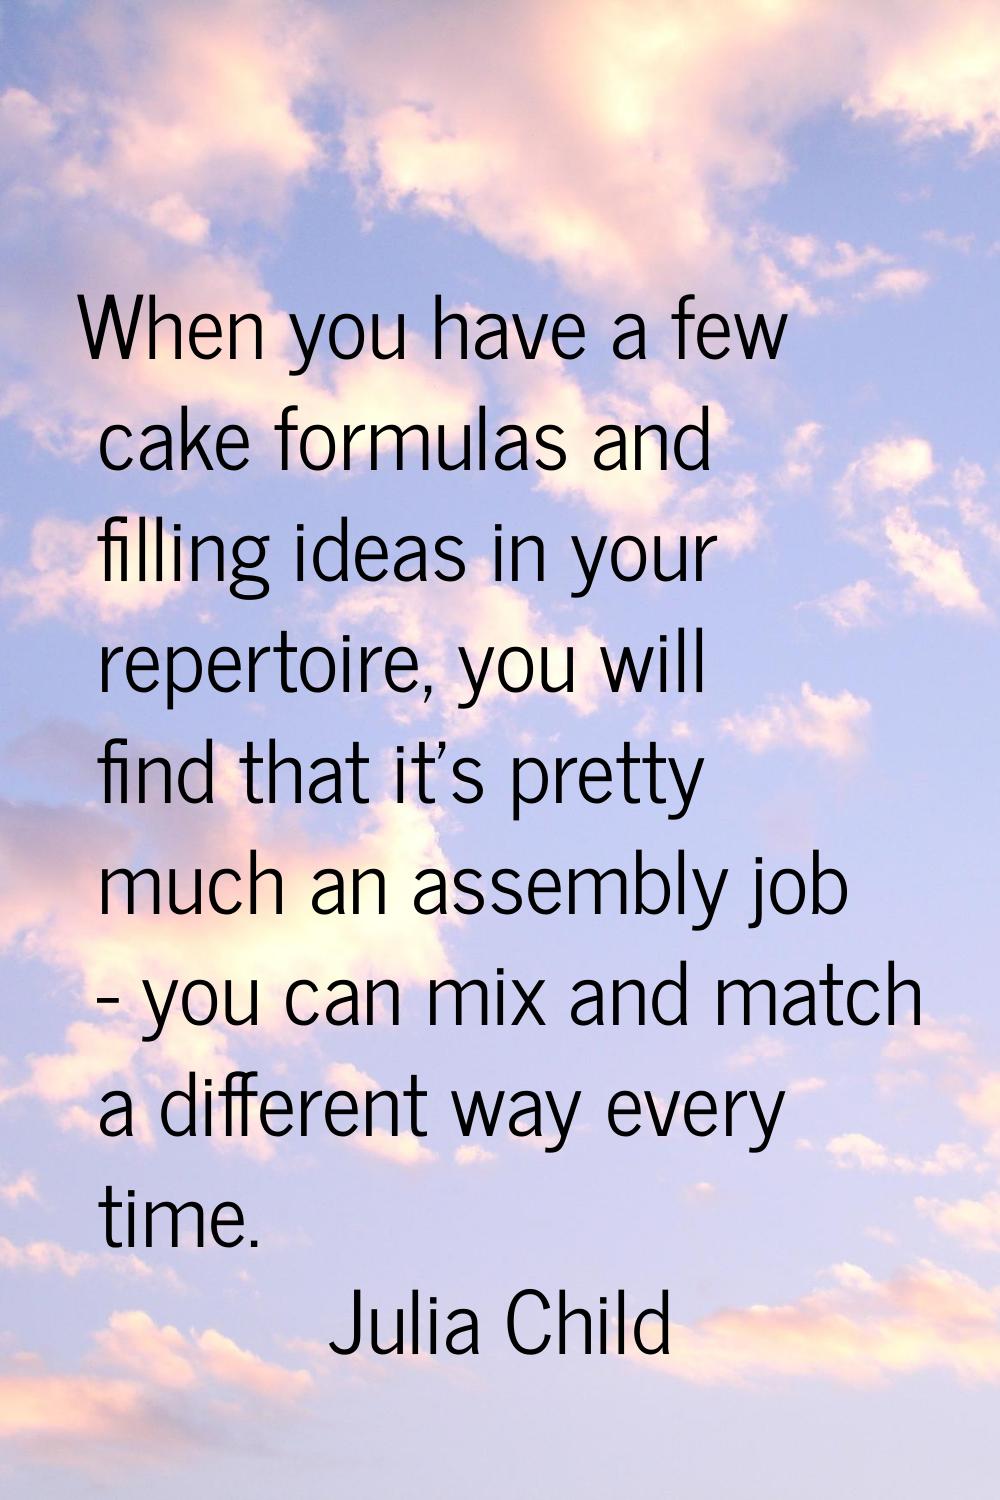 When you have a few cake formulas and filling ideas in your repertoire, you will find that it's pre